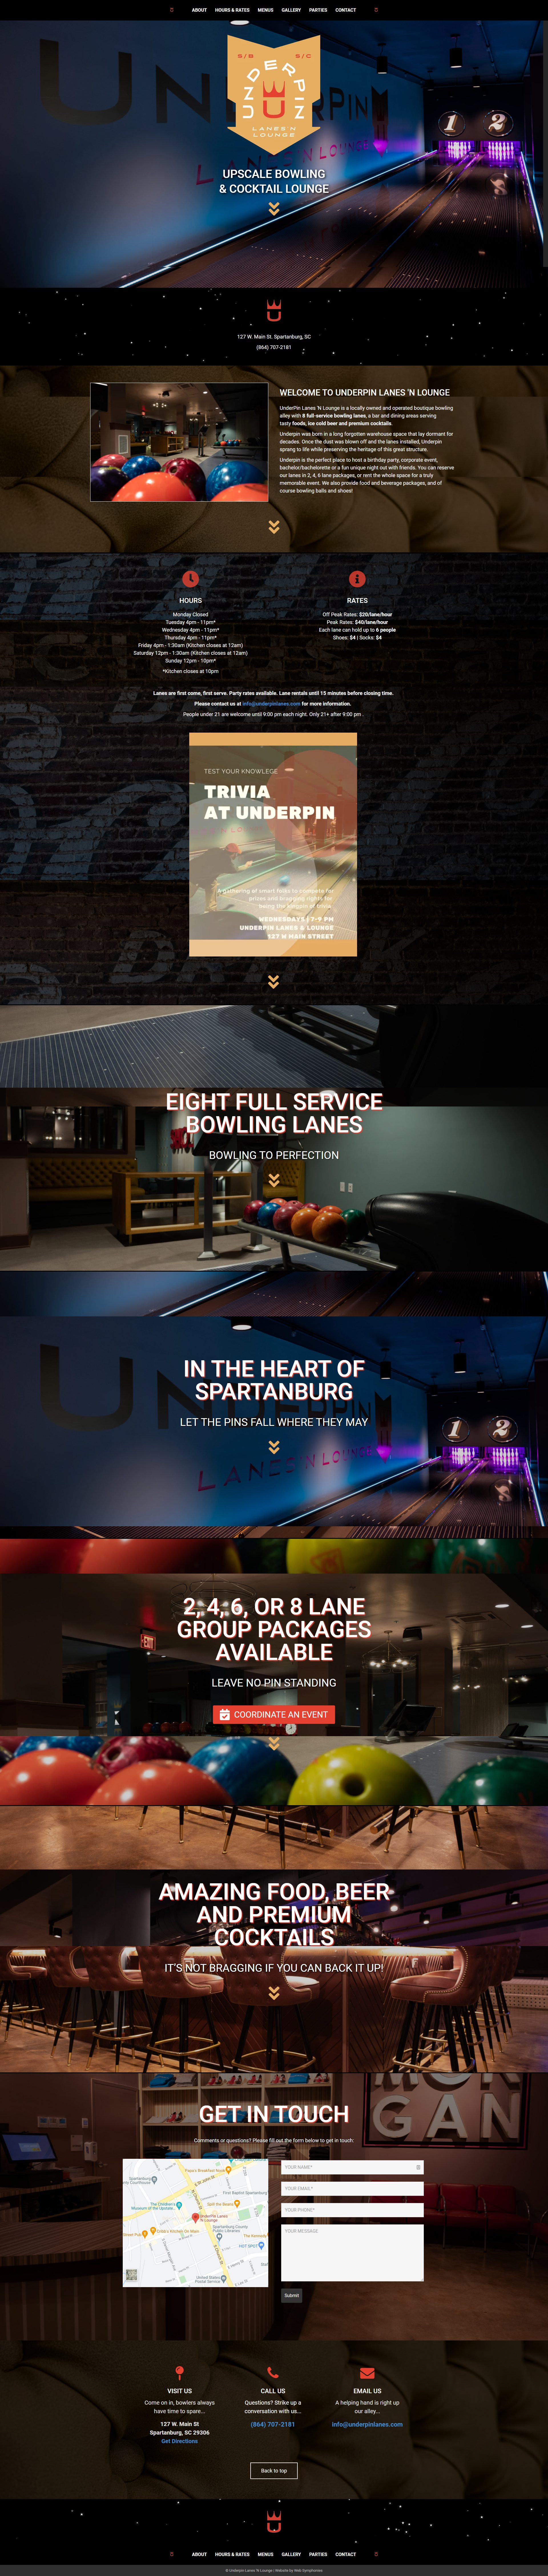 Underpin Lanes - Bowling Alley